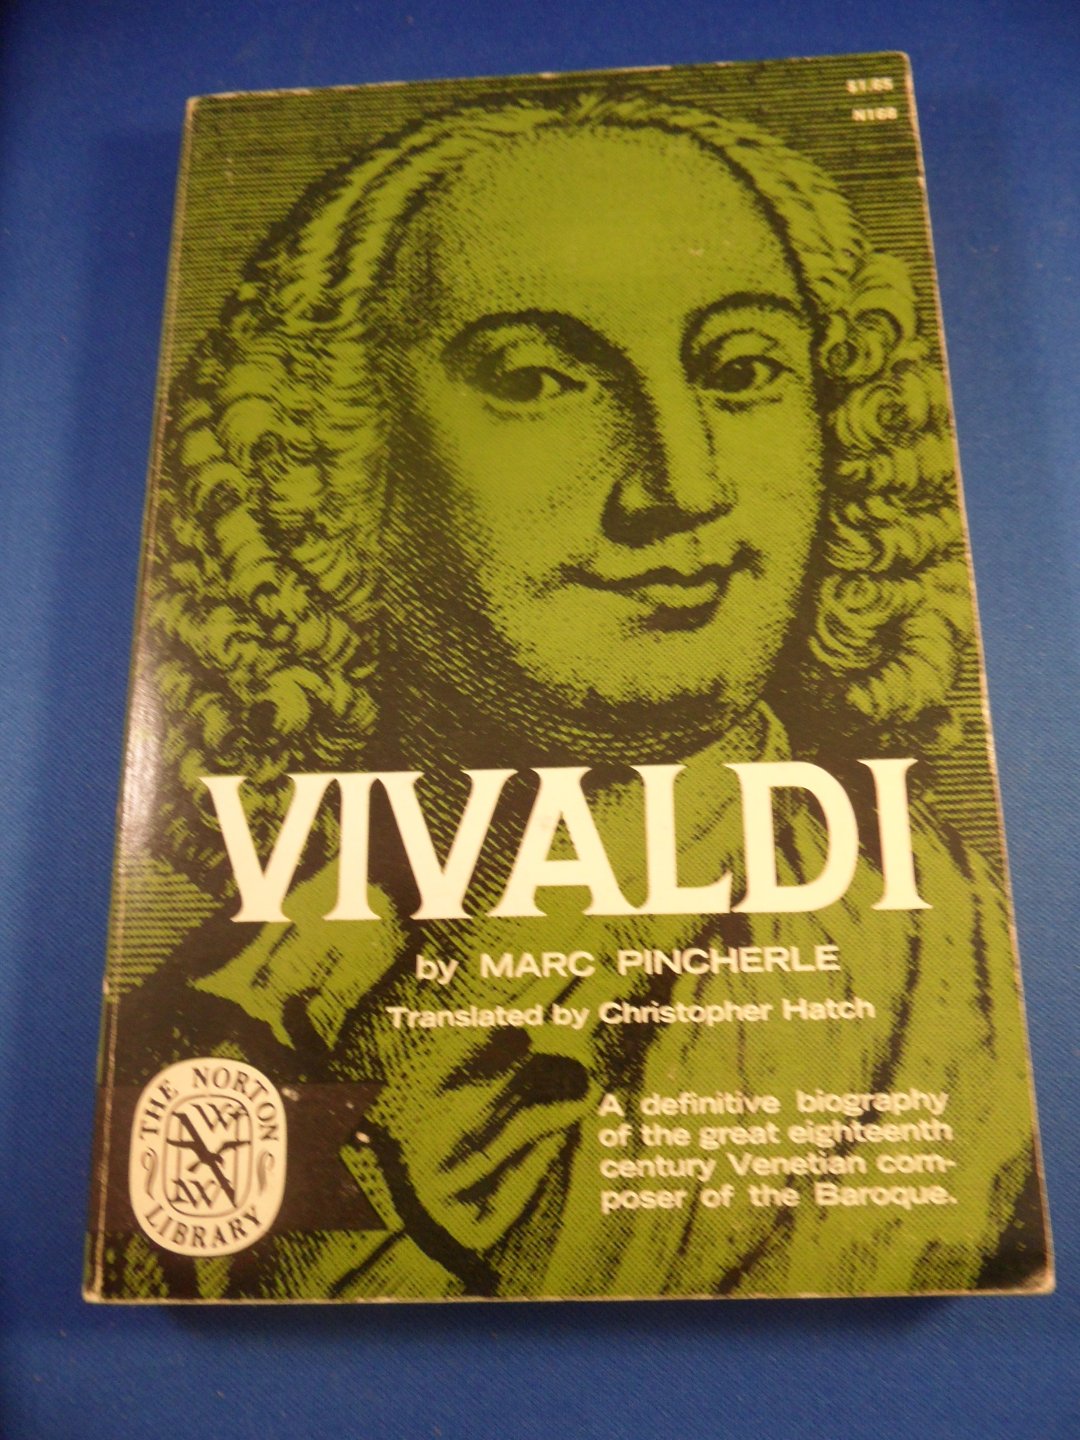 Pincherle, Marc - Vivaldi, a definitive biography of the great eighteenth century Venetian composter of the Baroque